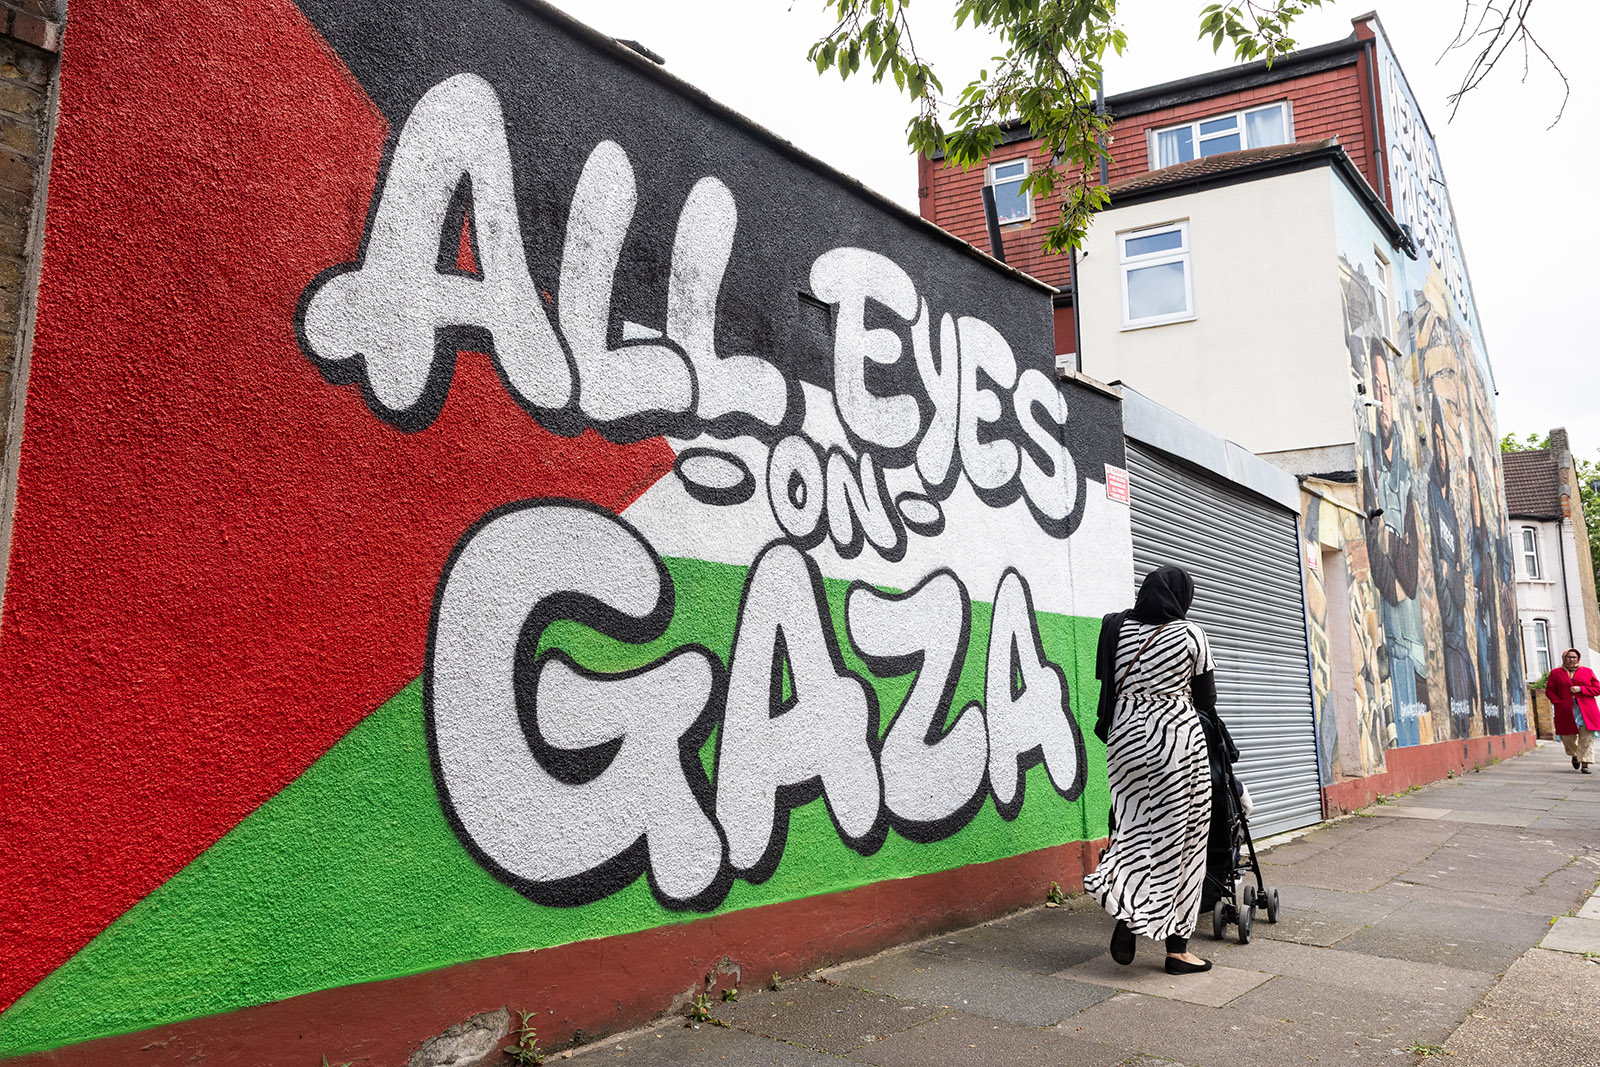 Members of the public pass pro-Palestinian street art in tribute to Palestinian journalists Mohamed Al Masri, Ali Jadallah, Hind Khoudary and Abdulhakim Abu Riash in Ilford on 7th May 2024 in London, United Kingdom. The artwork, which is in two sections, consists of the words 'All Eyes On Gaza' on a Palestinian flag and a painted rendering of a photograph of the four journalists with the words 'Heroes of Palestine' above. It was produced by Creative Debuts, an art platform providing opportunities and support to emerging artists from around the world. (photo by Mark Kerrison/In Pictures via Getty Images)